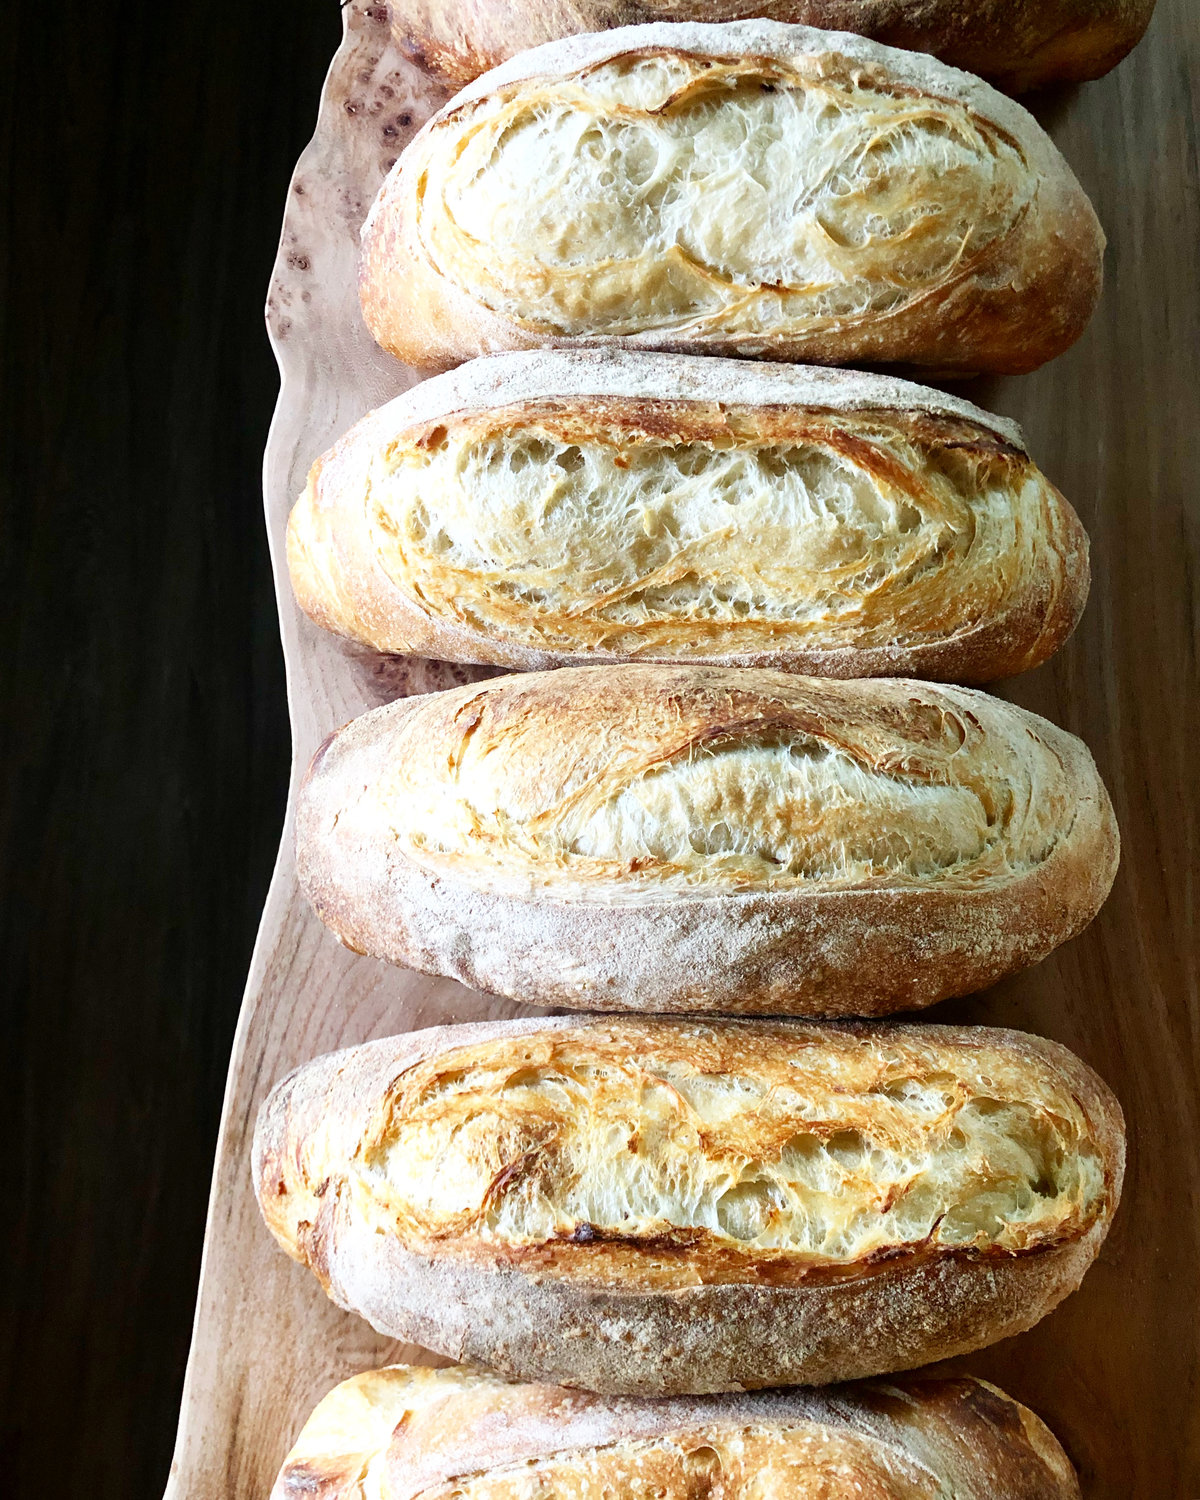 Freshly baked loaves of the original sourdough bread sold by Anna’s @BreadinBlaine.